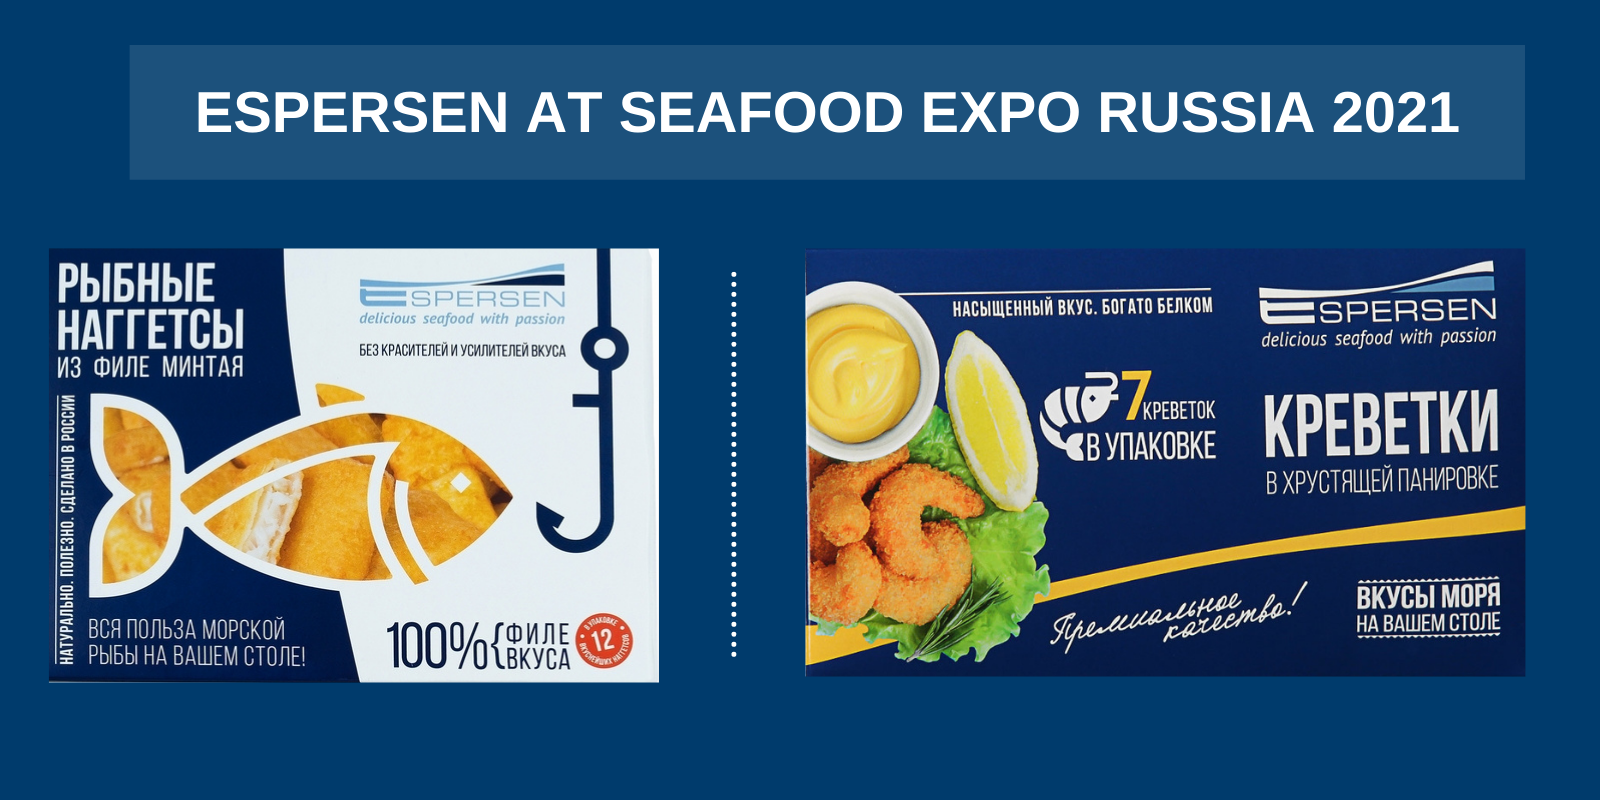 ESPERSEN first time to participate in SEAFOOD EXPO RUSSIA 2021